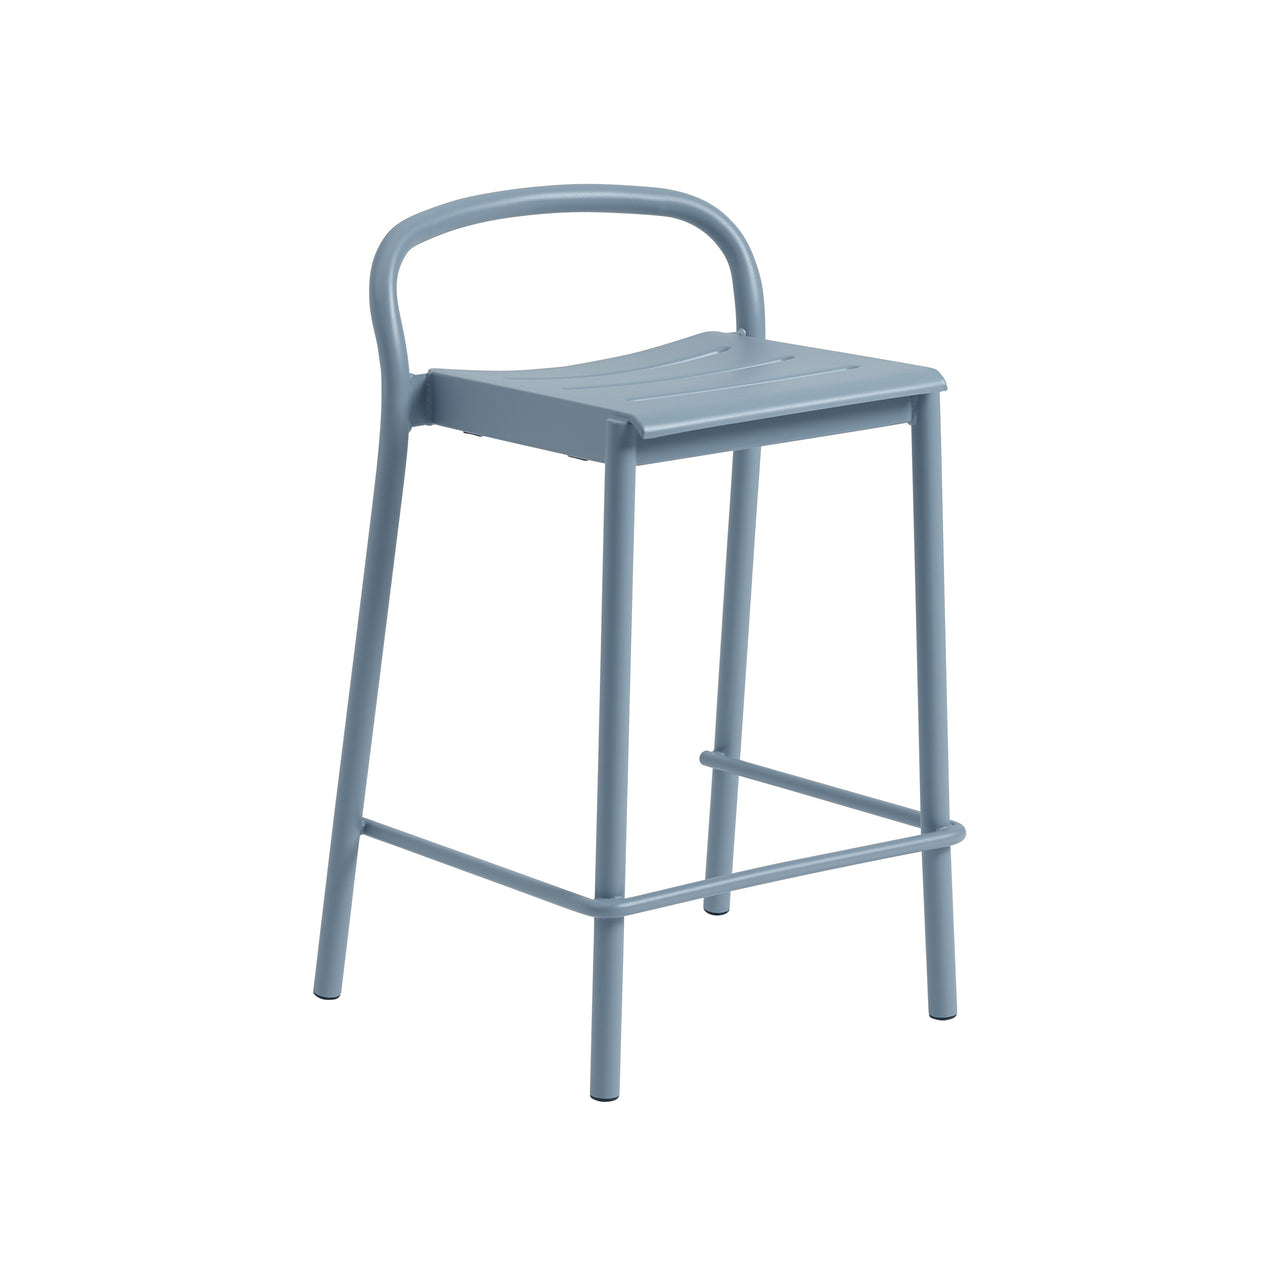 Linear Steel Bar + Counter Stool: Counter + Pale Blue